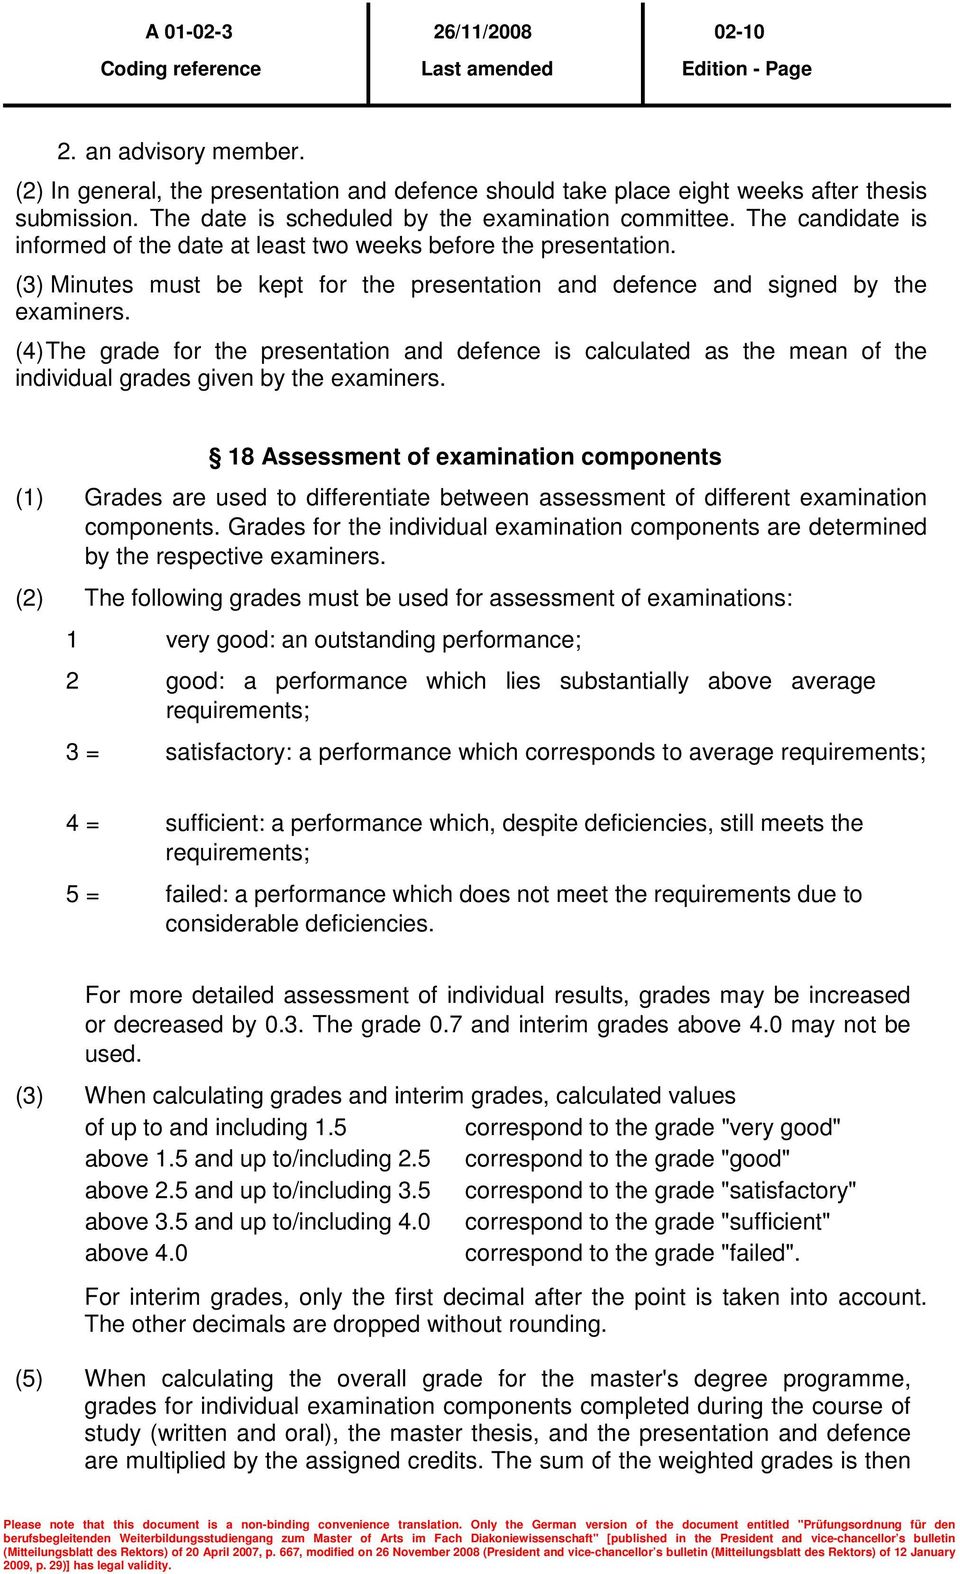 (4) The grade for the presentation and defence is calculated as the mean of the individual grades given by the examiners.